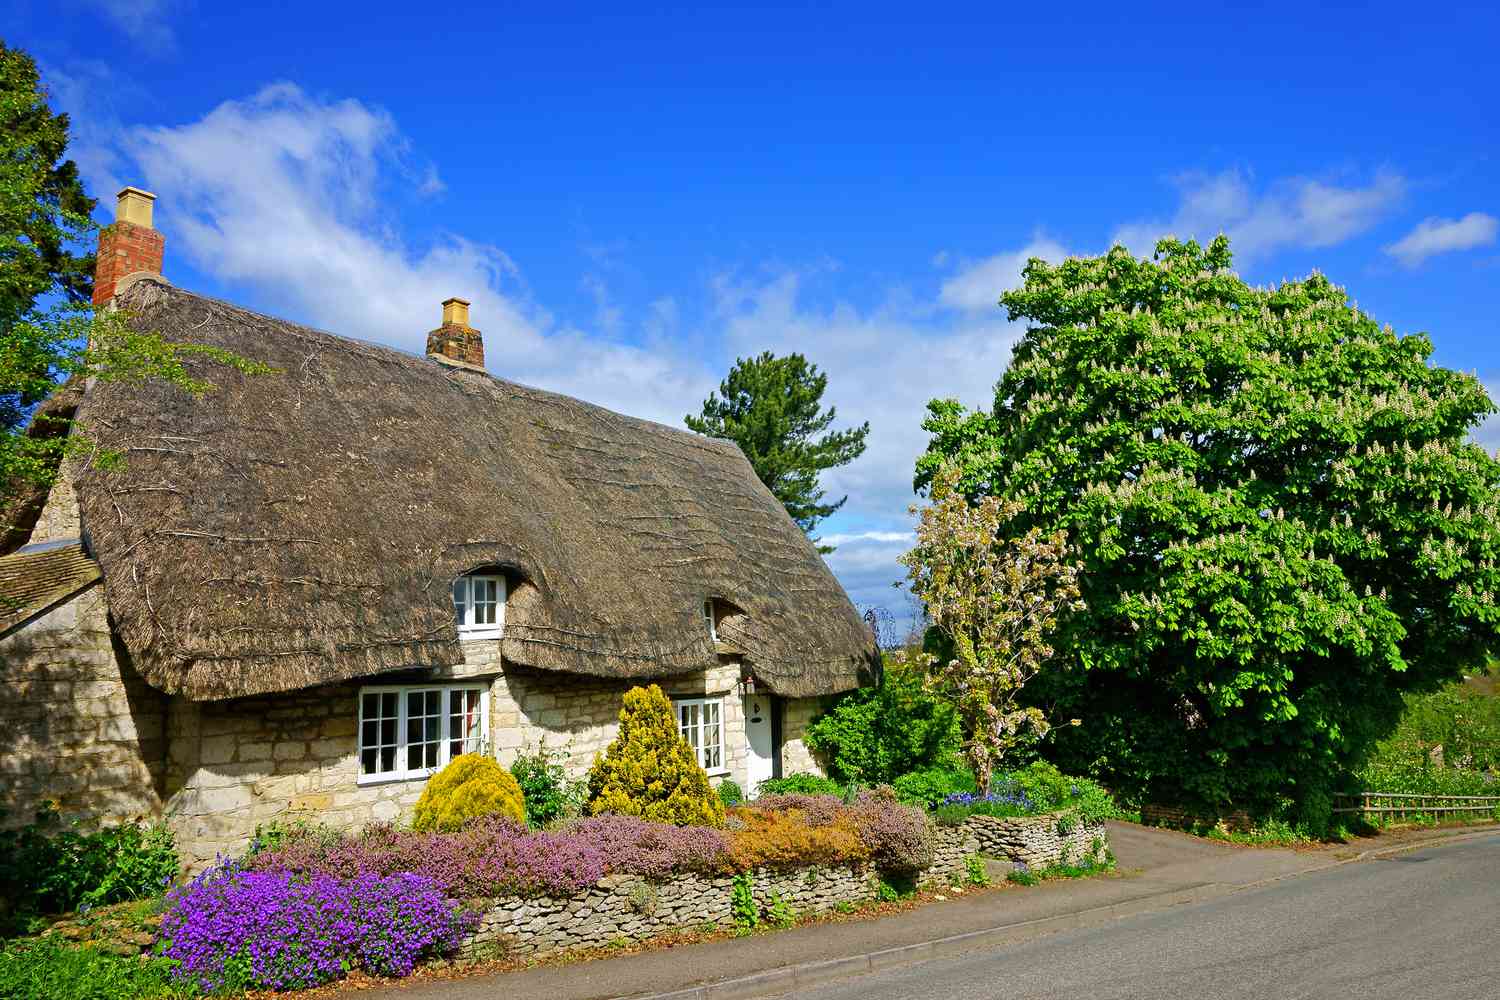 A Thatched Cottage in the Cotswolds, Gloucestershire, UK